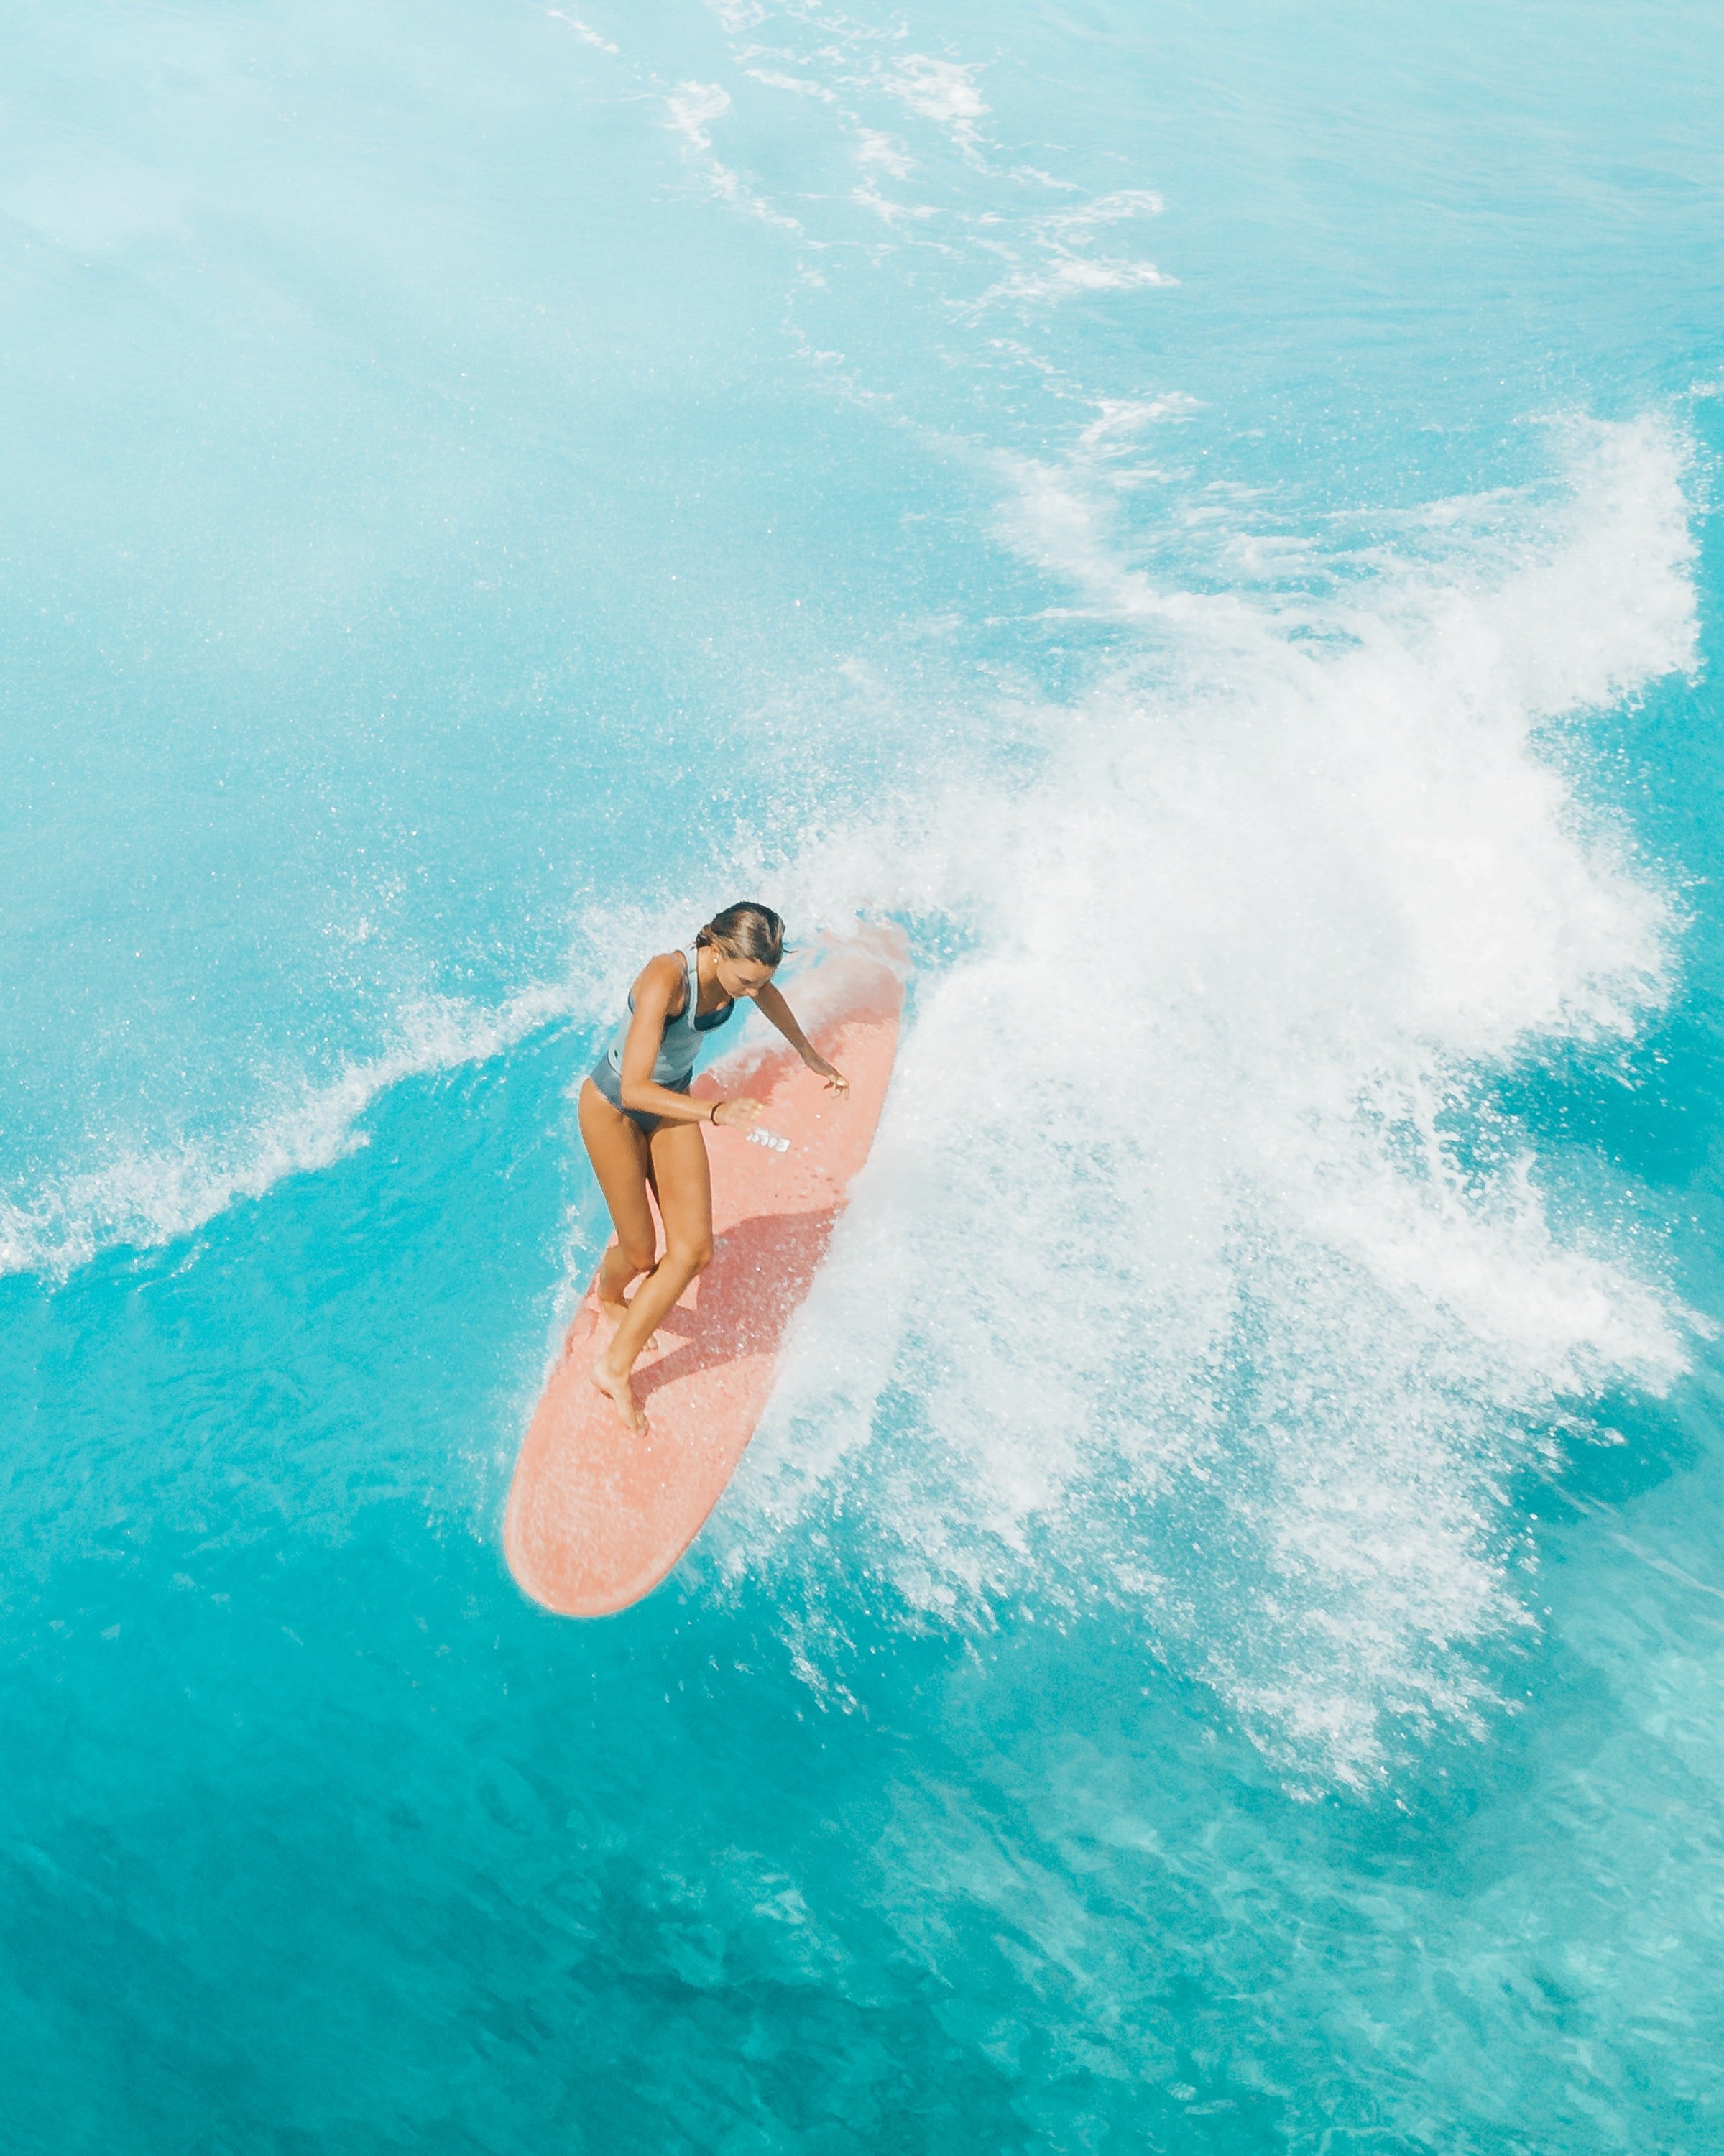 Pictured - An aerial photo of a woman in a bikini surfing | Source: Pexels